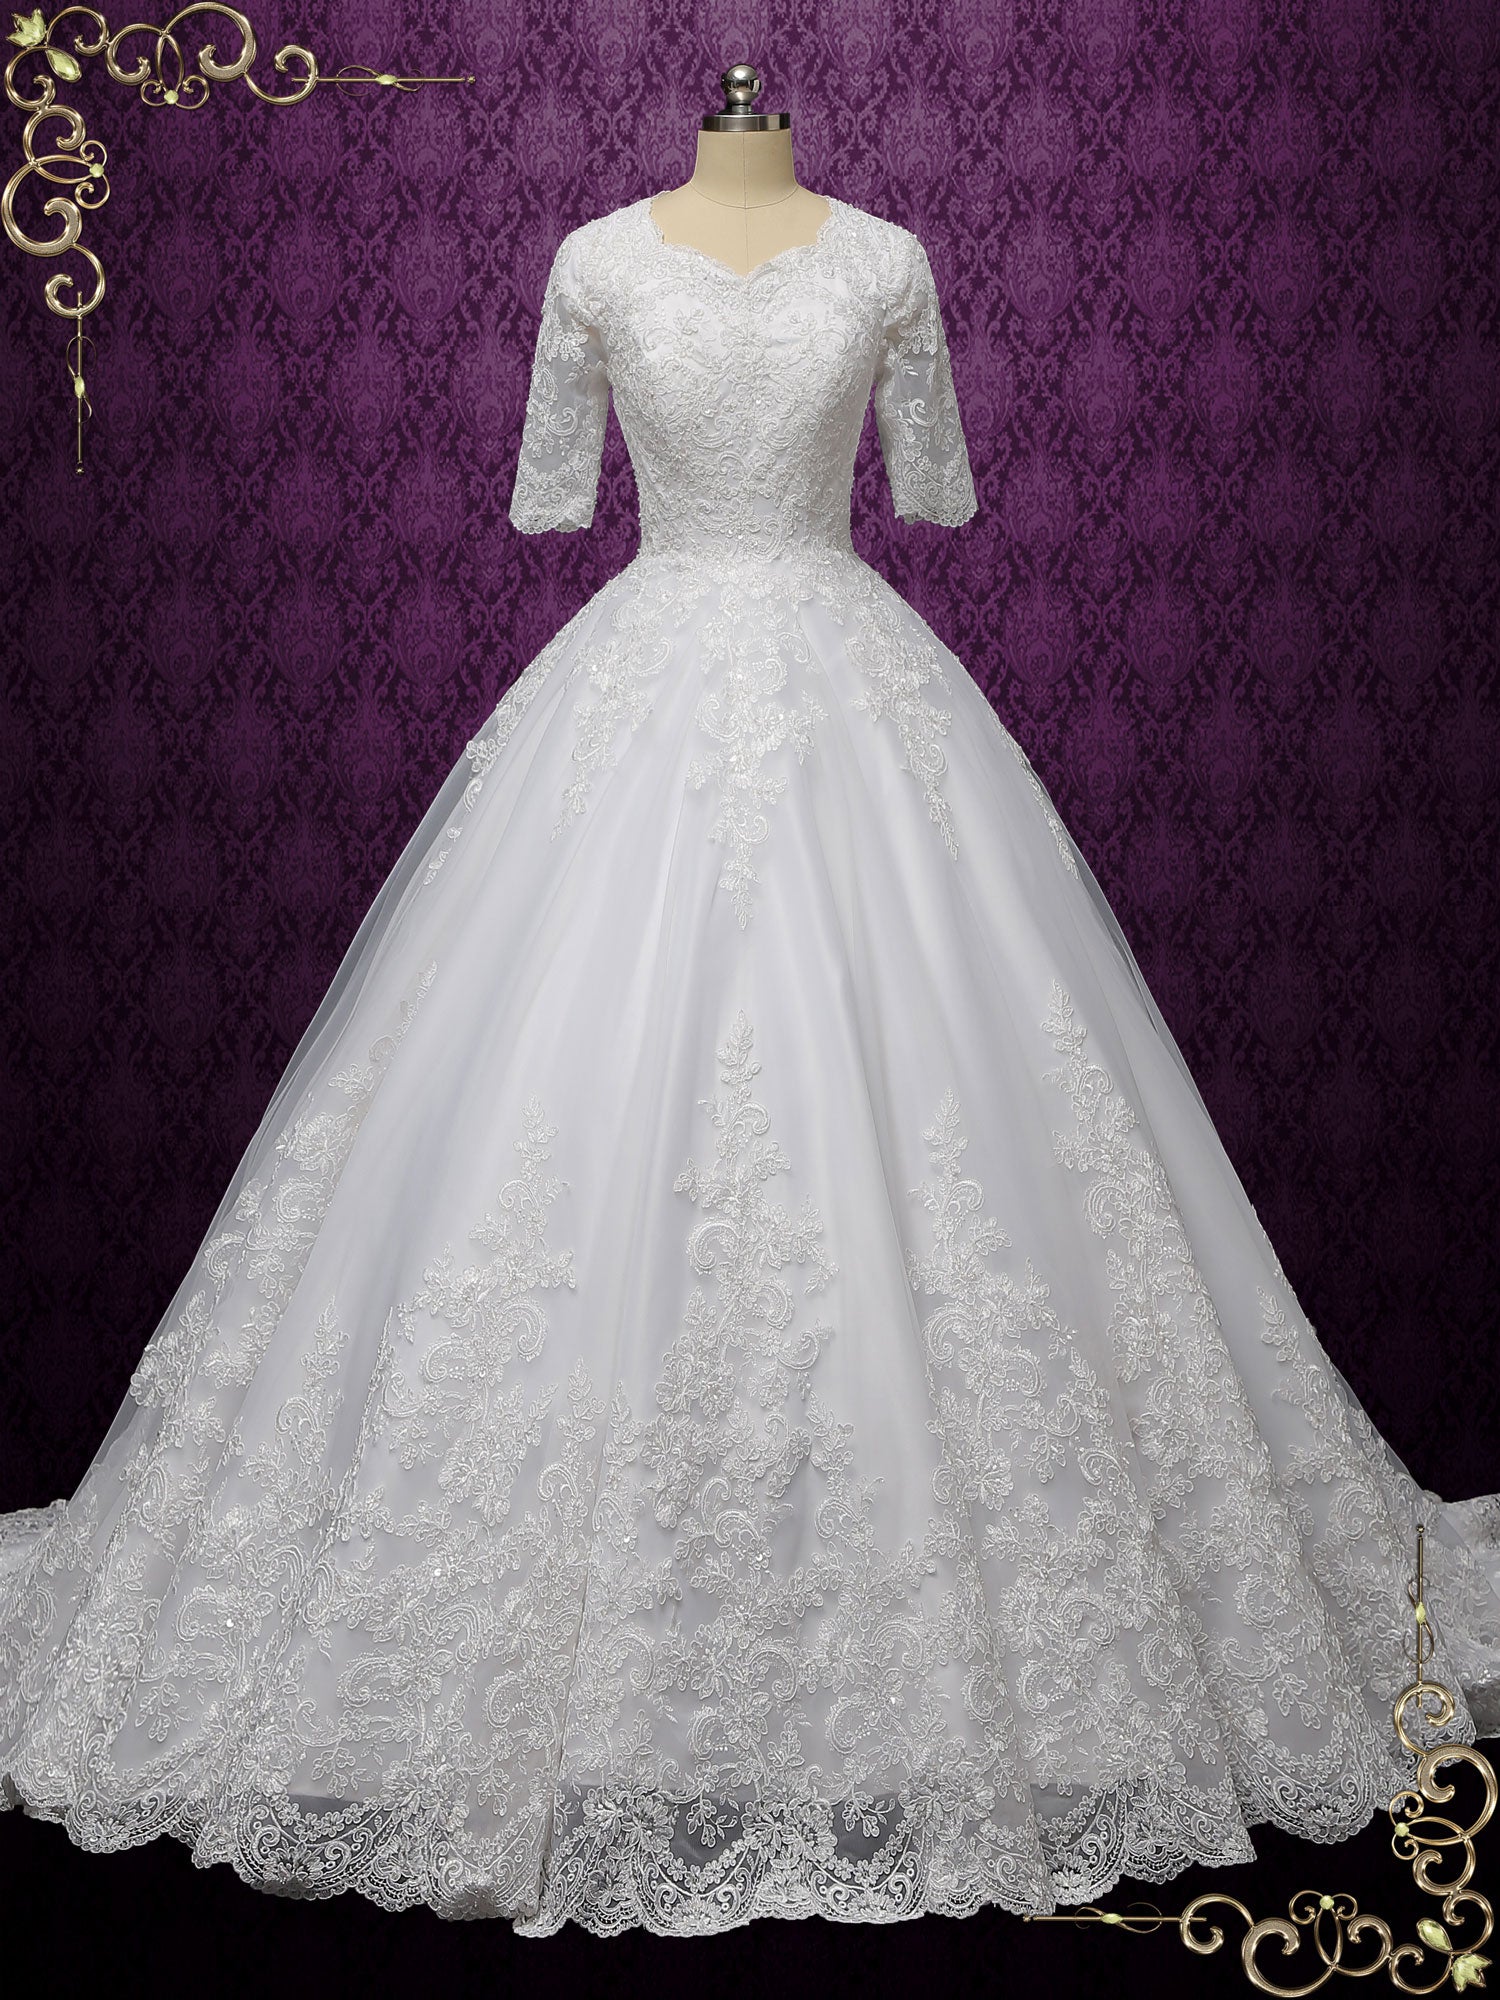 Modest Lace Ball Gown Wedding Dress With Sleeves Chester Ieie Bridal 3370